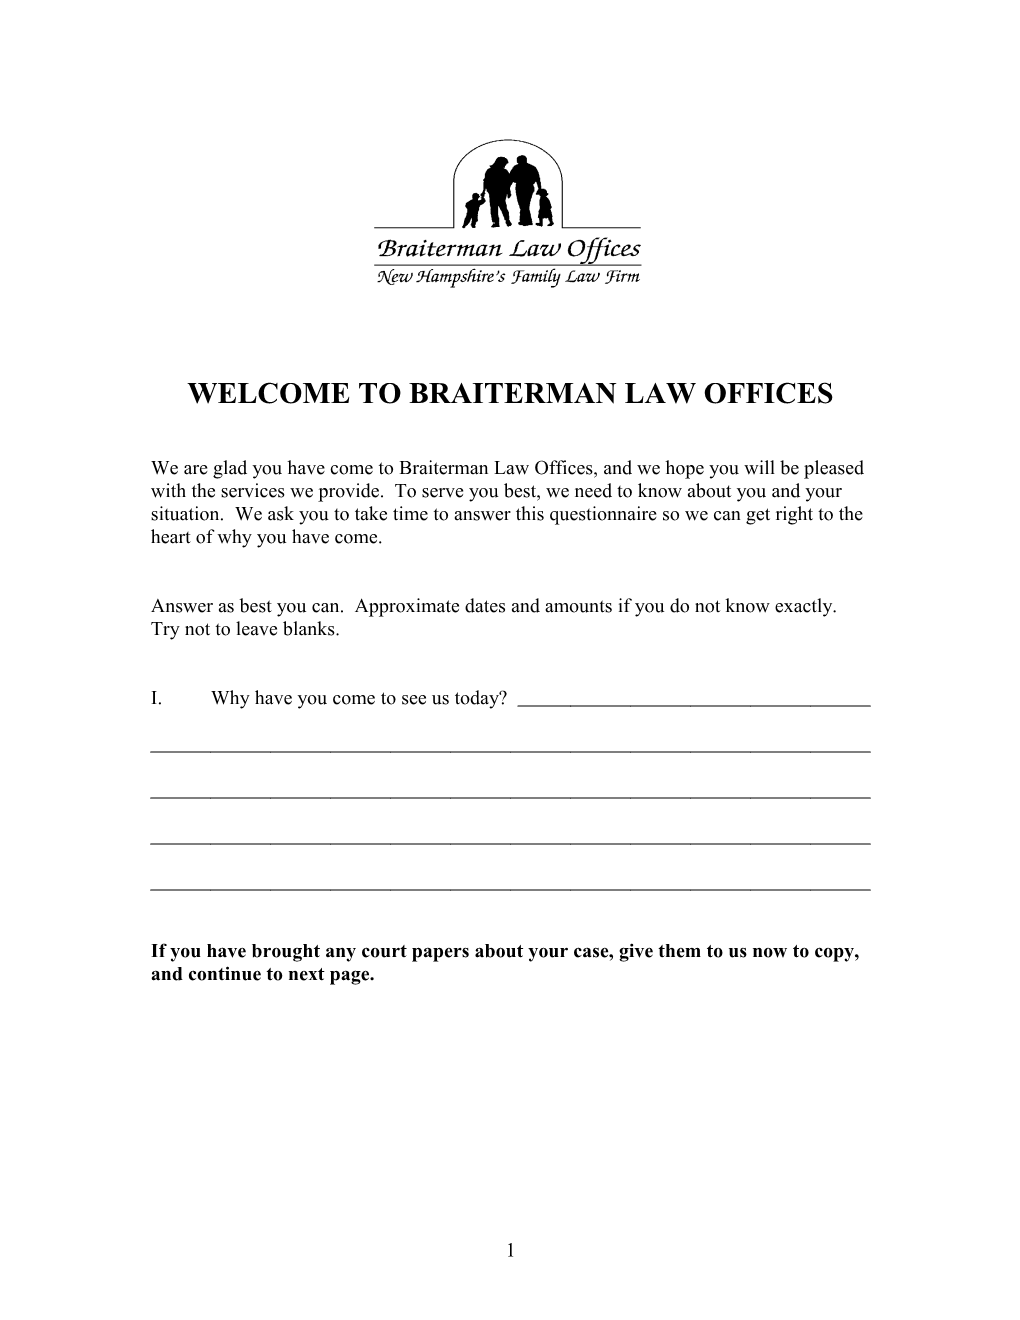 Welcome to Braiterman Law Offices